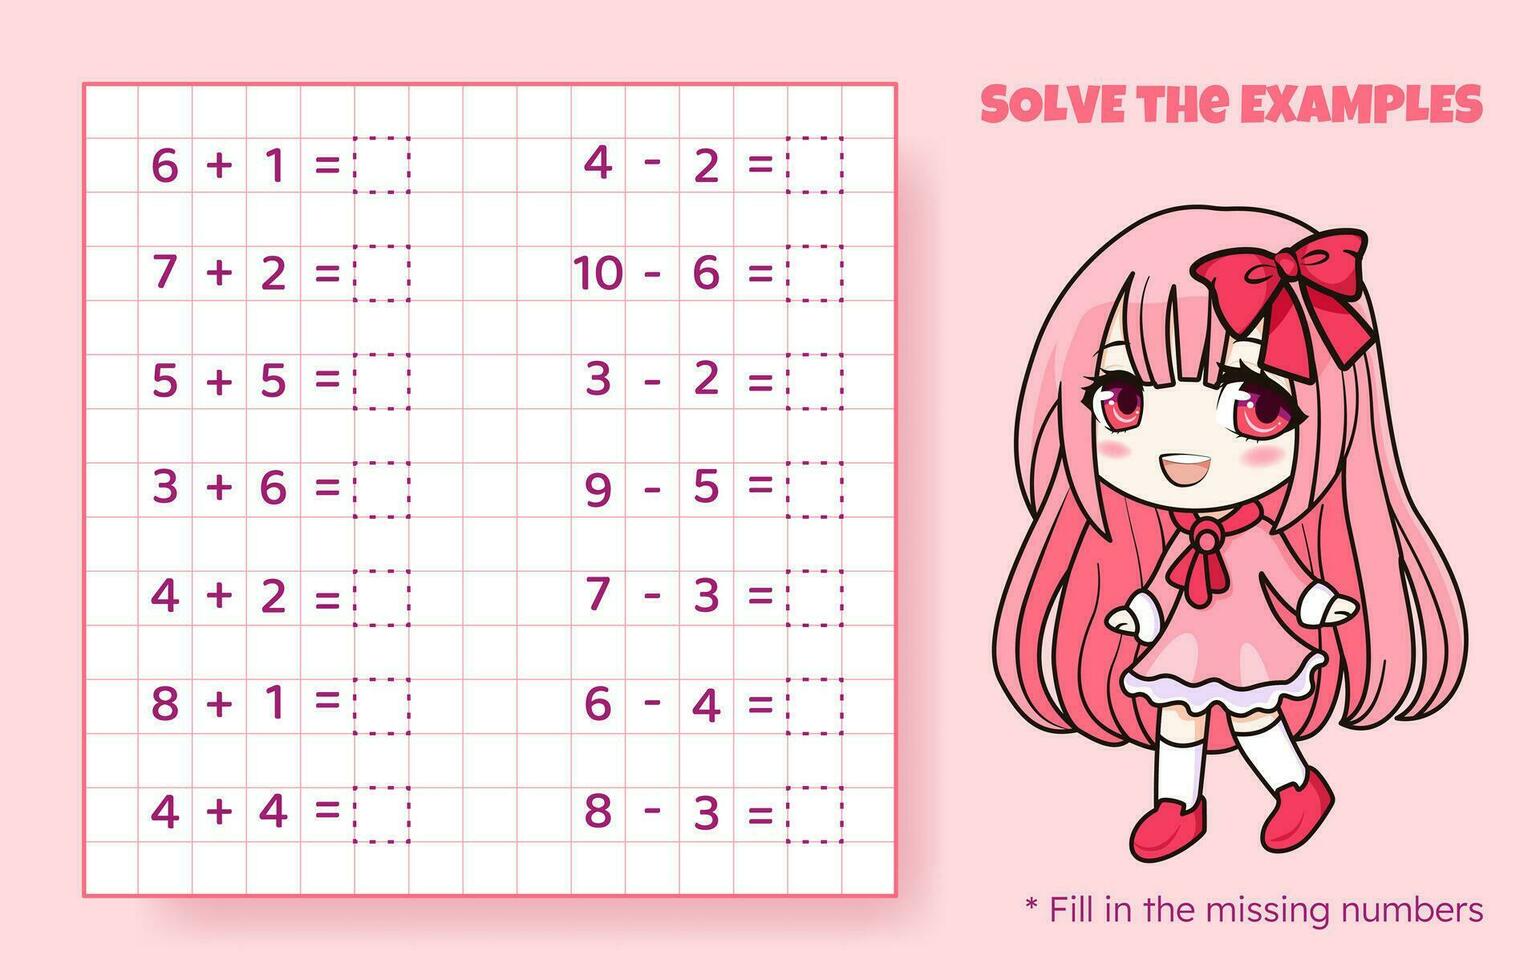 Solve the examples. Addition and subtraction up to 10. Mathematical puzzle game. Worksheet for preschool kids. Vector illustration. Cartoon educational game with cute anime girl for children.